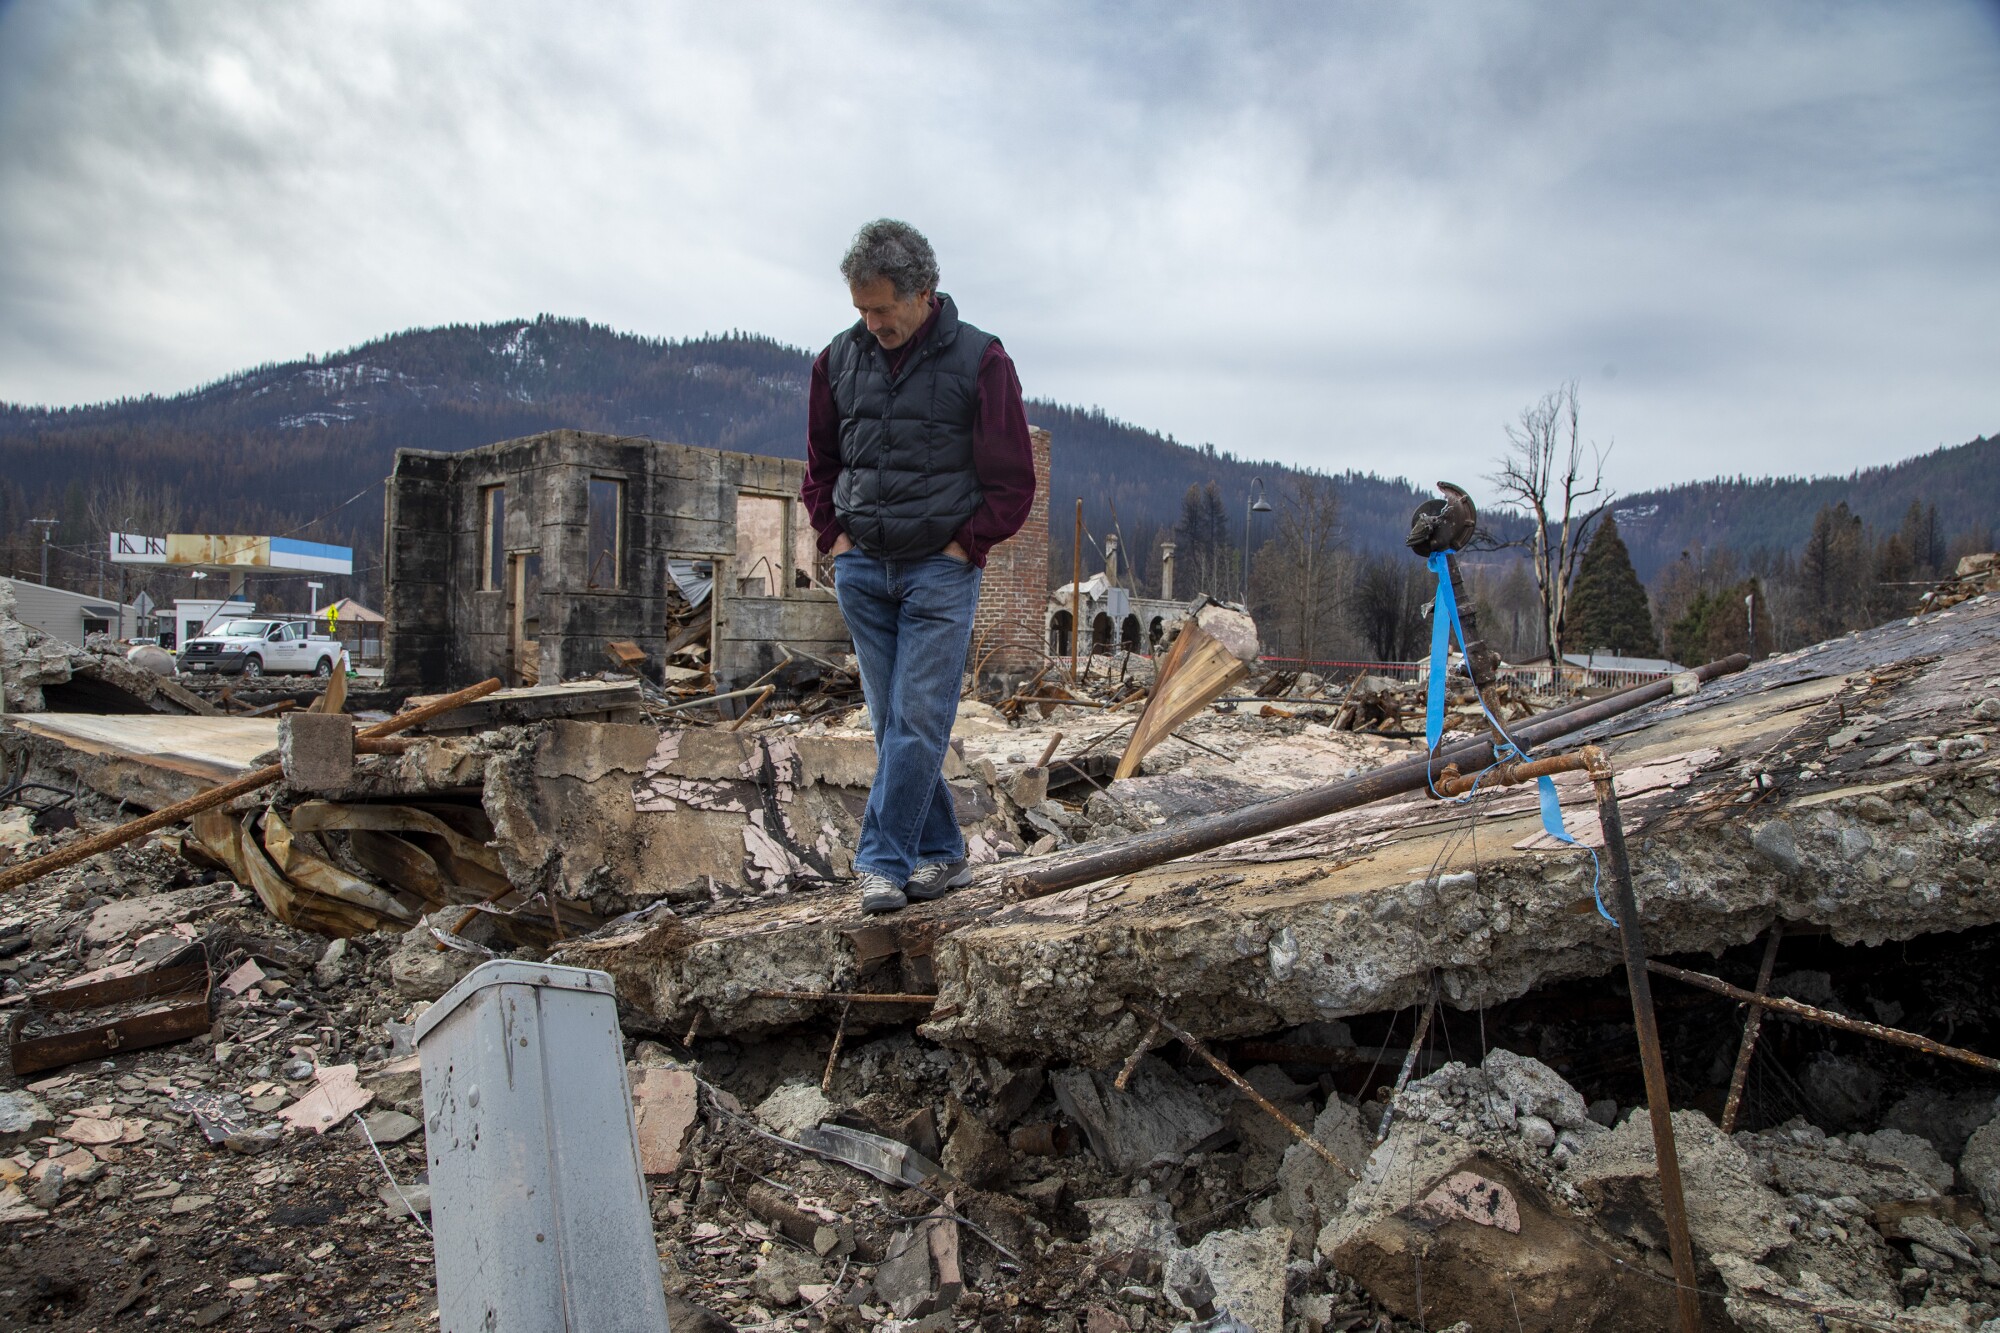 A man stands in the burned ruins of a town